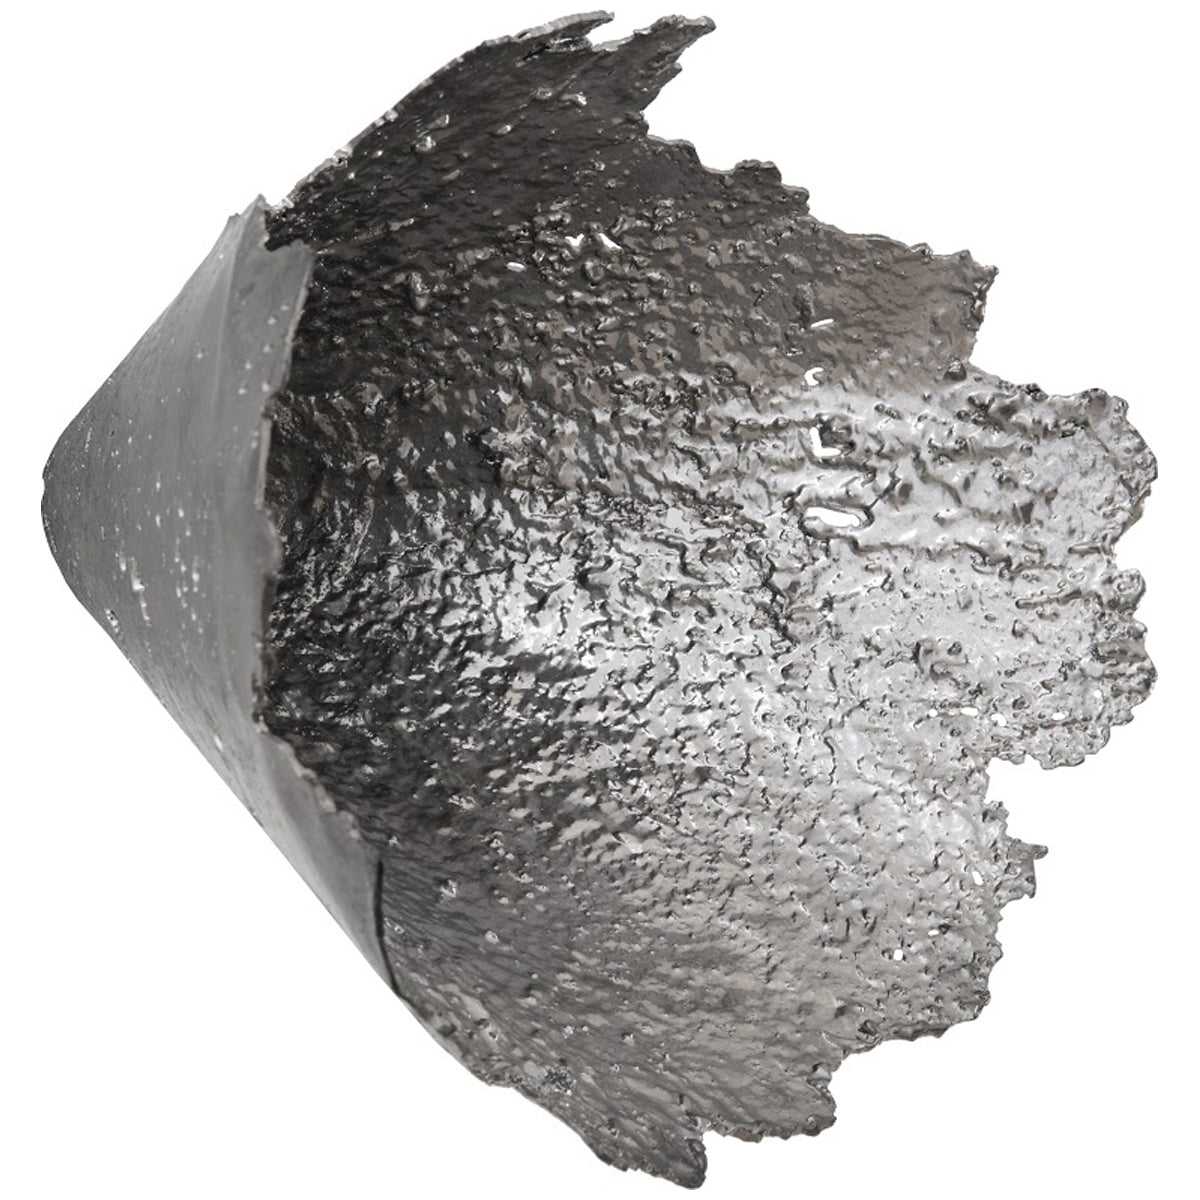 Phillips Collection Splash Bowl Jagged Wall Art